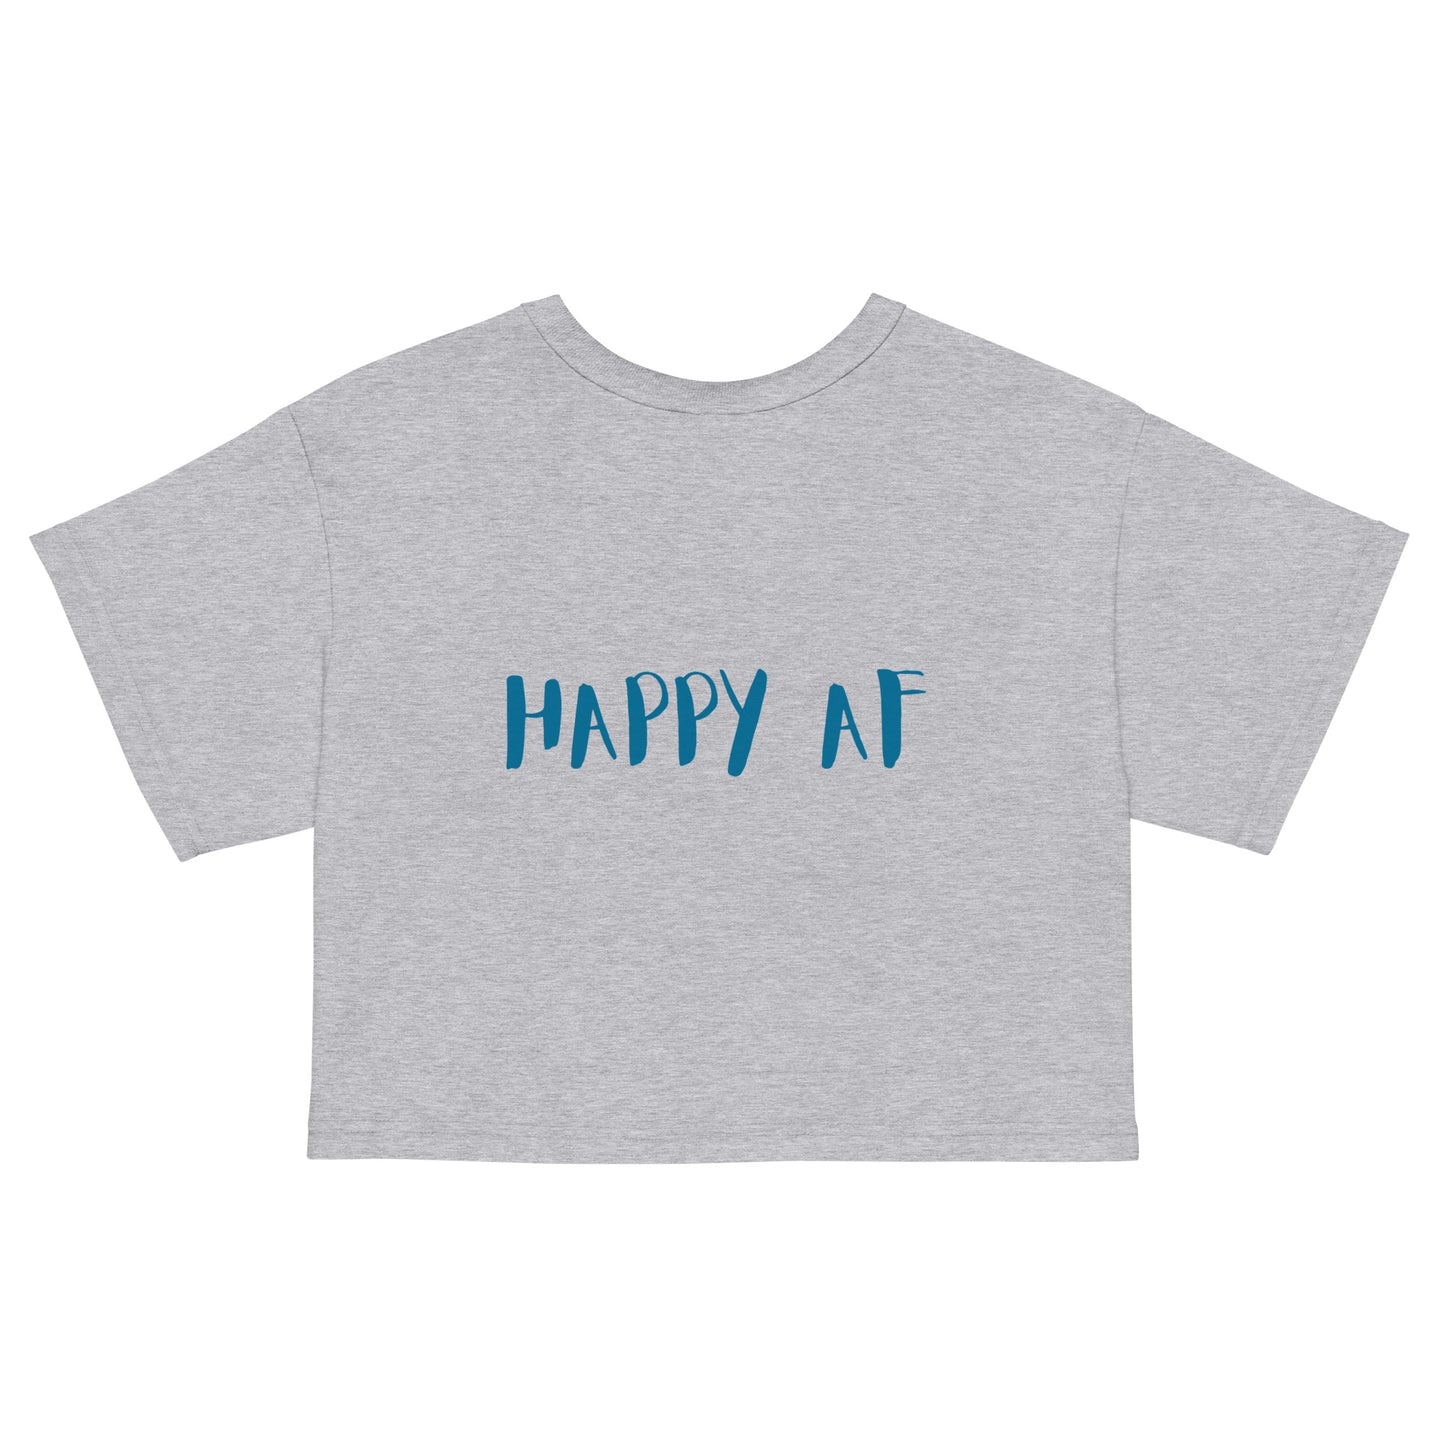 Waves of Happiness Champion crop top